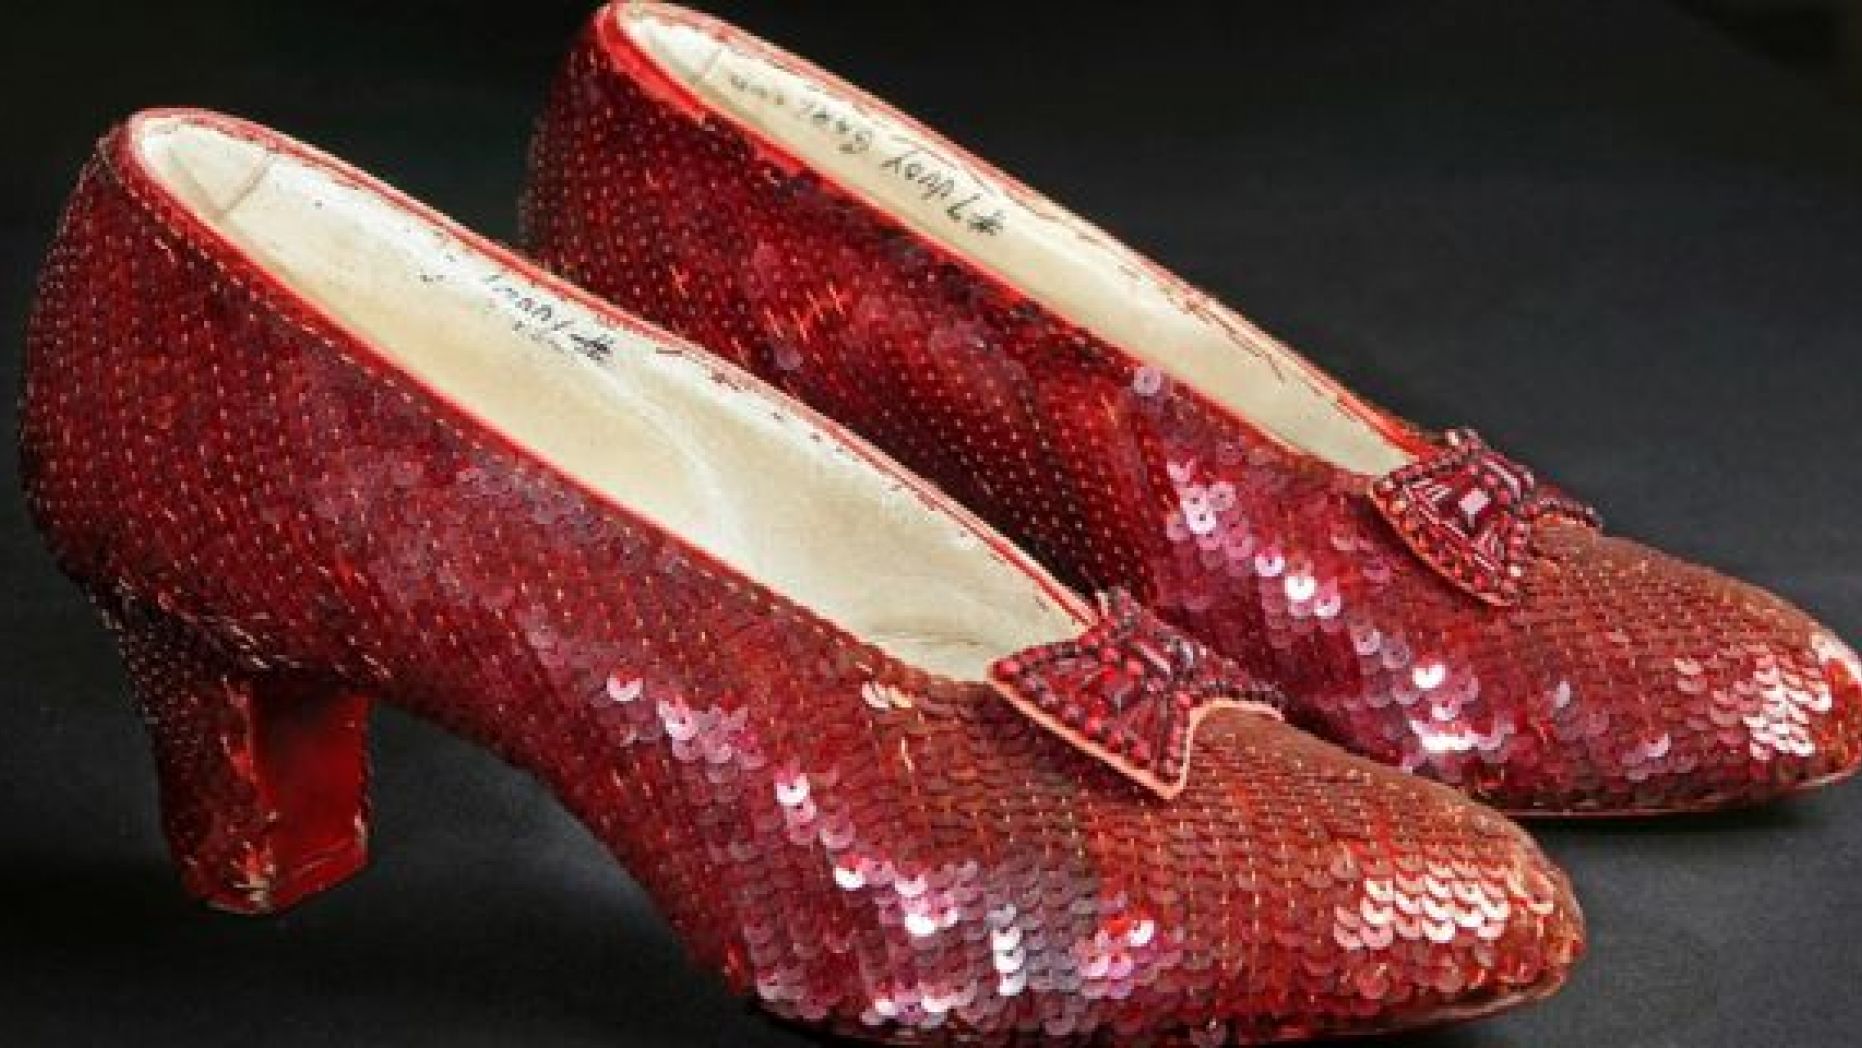 Fans of “The Wizard of Oz” looking for a glimpse of the iconic ruby slippers are in for a treat.